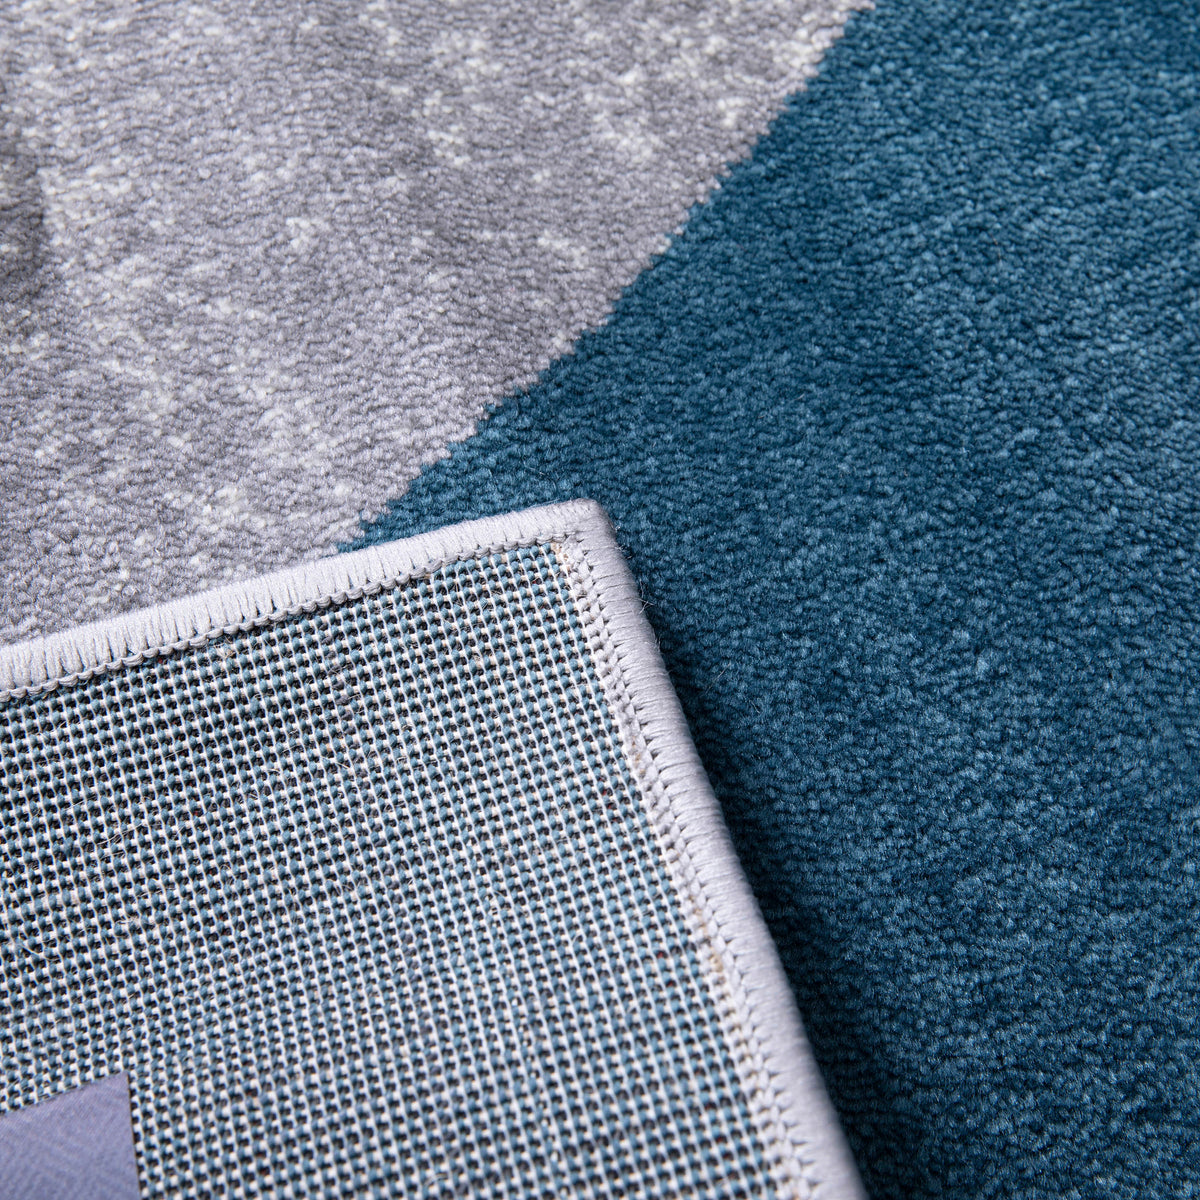 Blue,8' x 10' |#| Modern Geometric Design Area Rug in Blue, Gray, and White - 8' x 10'